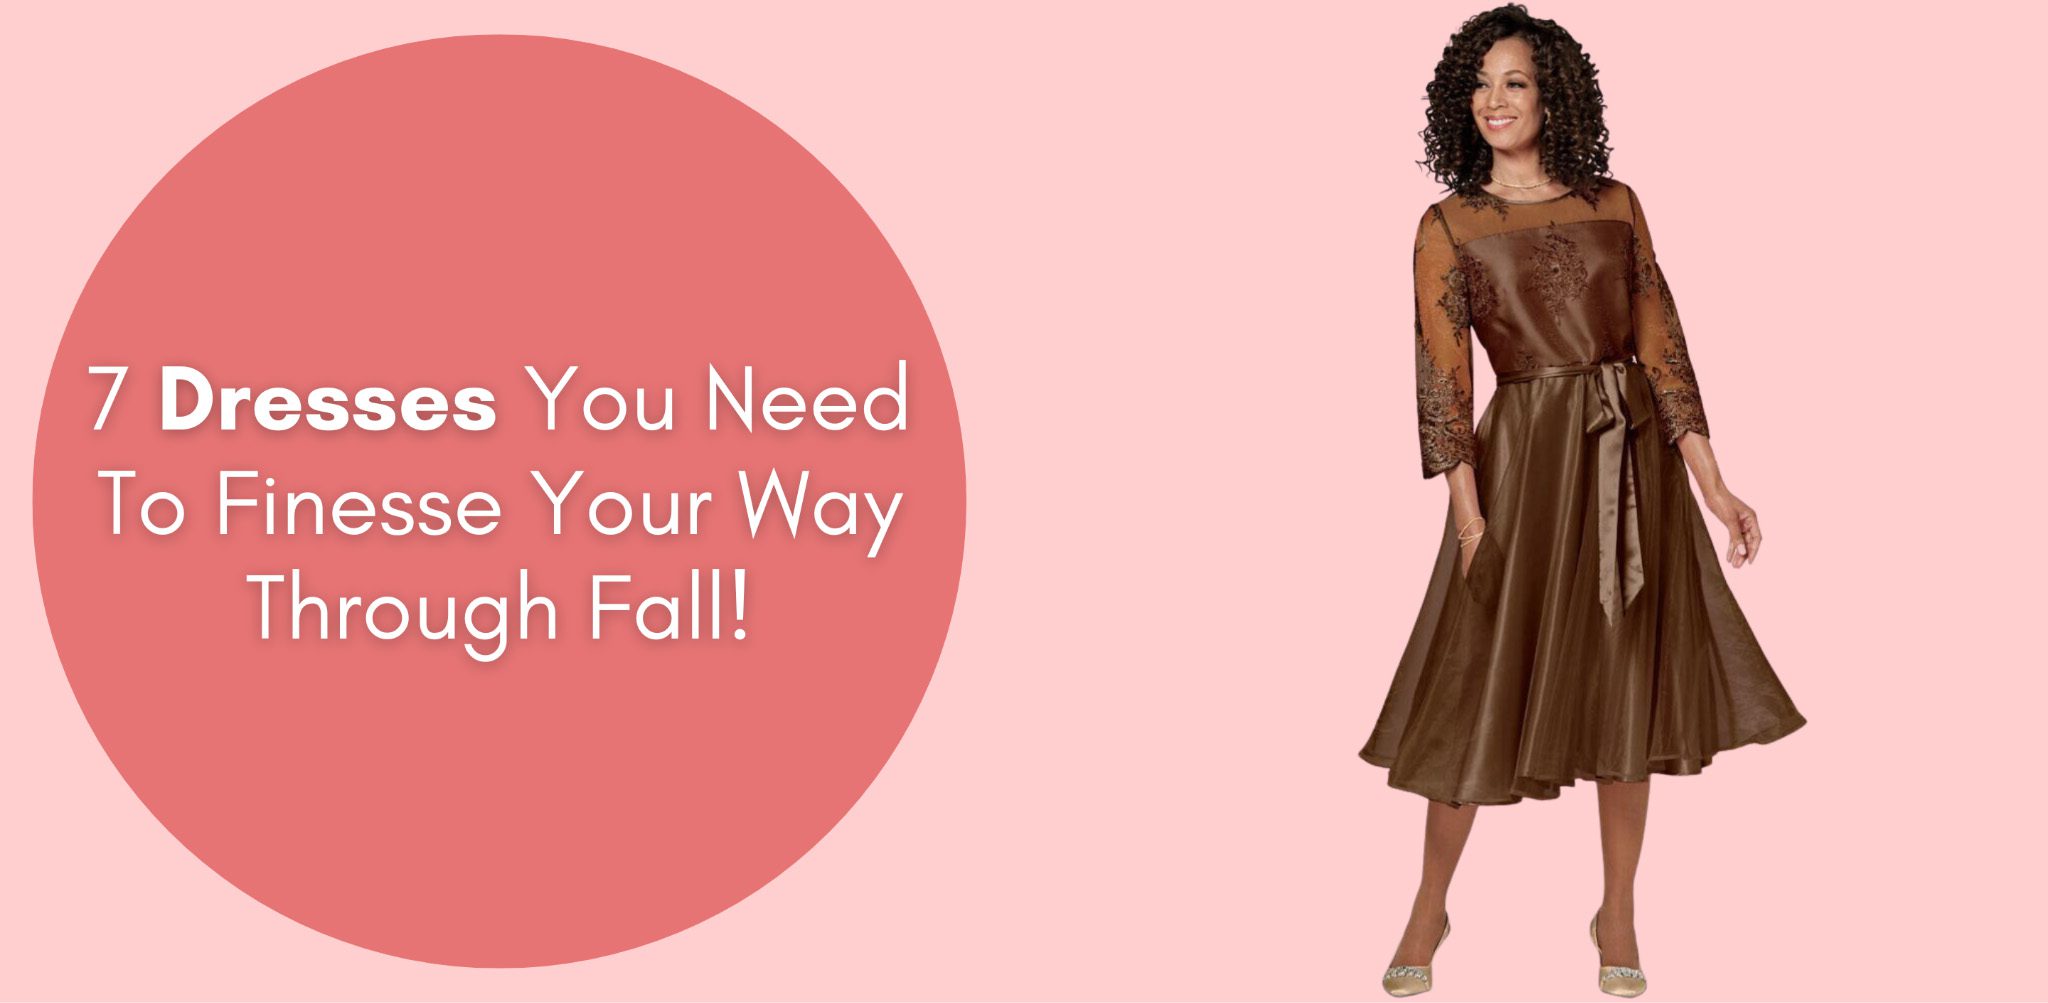 7 dresses you need to finesse your way through fall